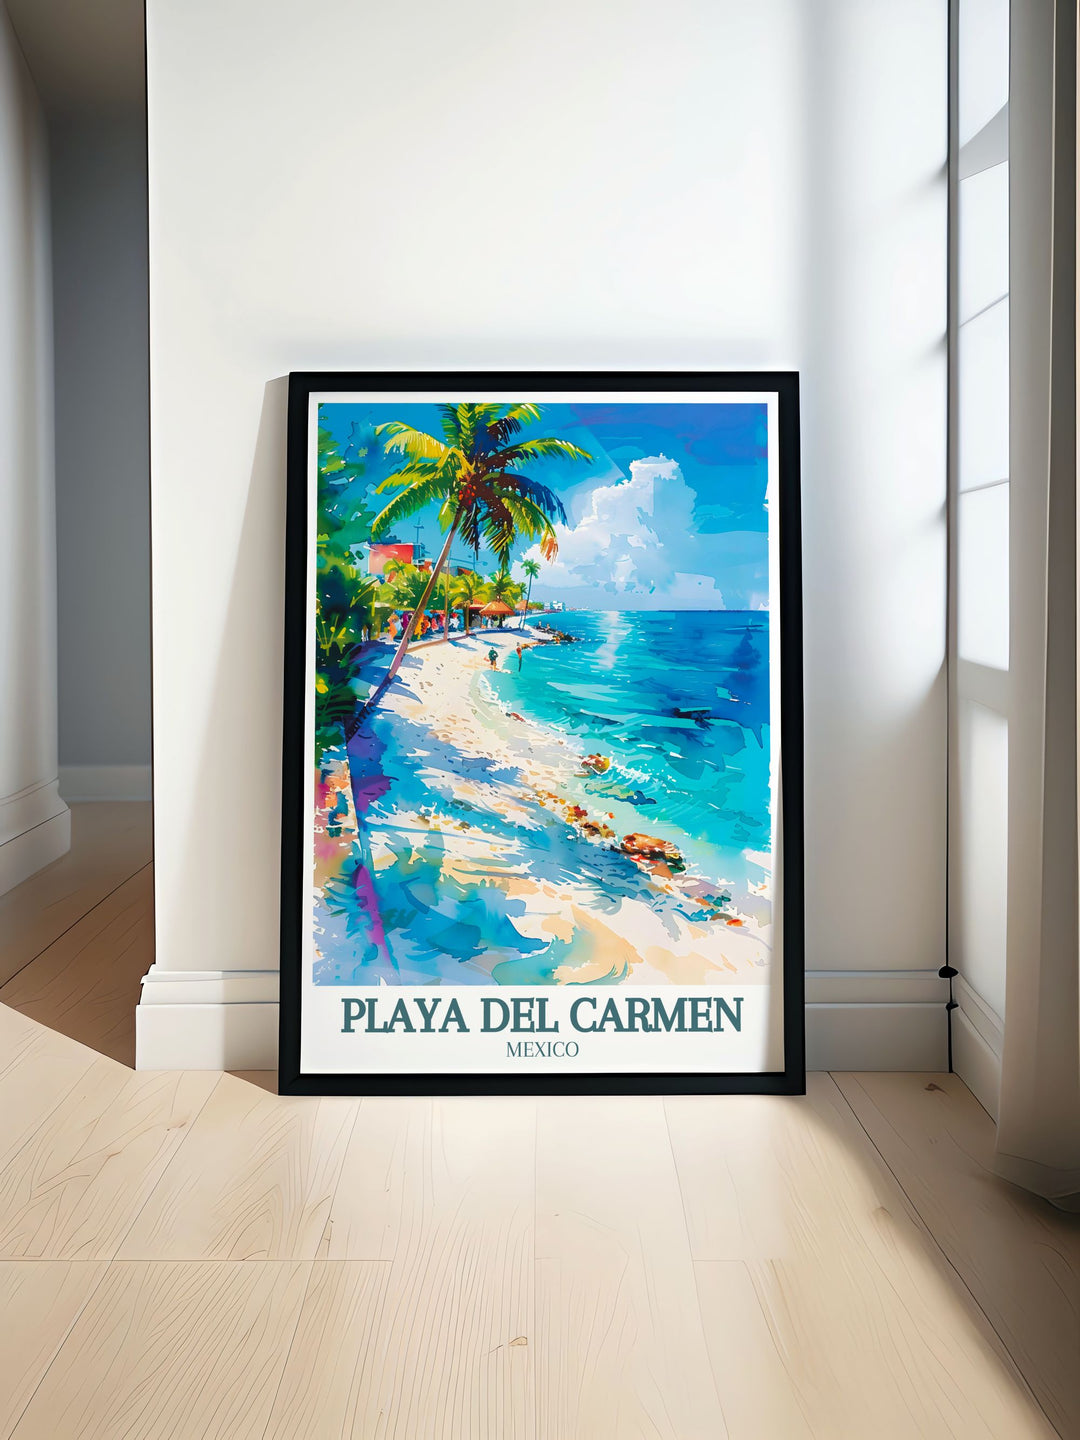 Mexico Wall Art featuring Playa Del Carmen with the Caribbean Sea in the background bringing vibrant colors and tropical vibes to your home decor. Perfect for travel lovers and those who appreciate the beauty of Mexico and its stunning coastal landscapes.